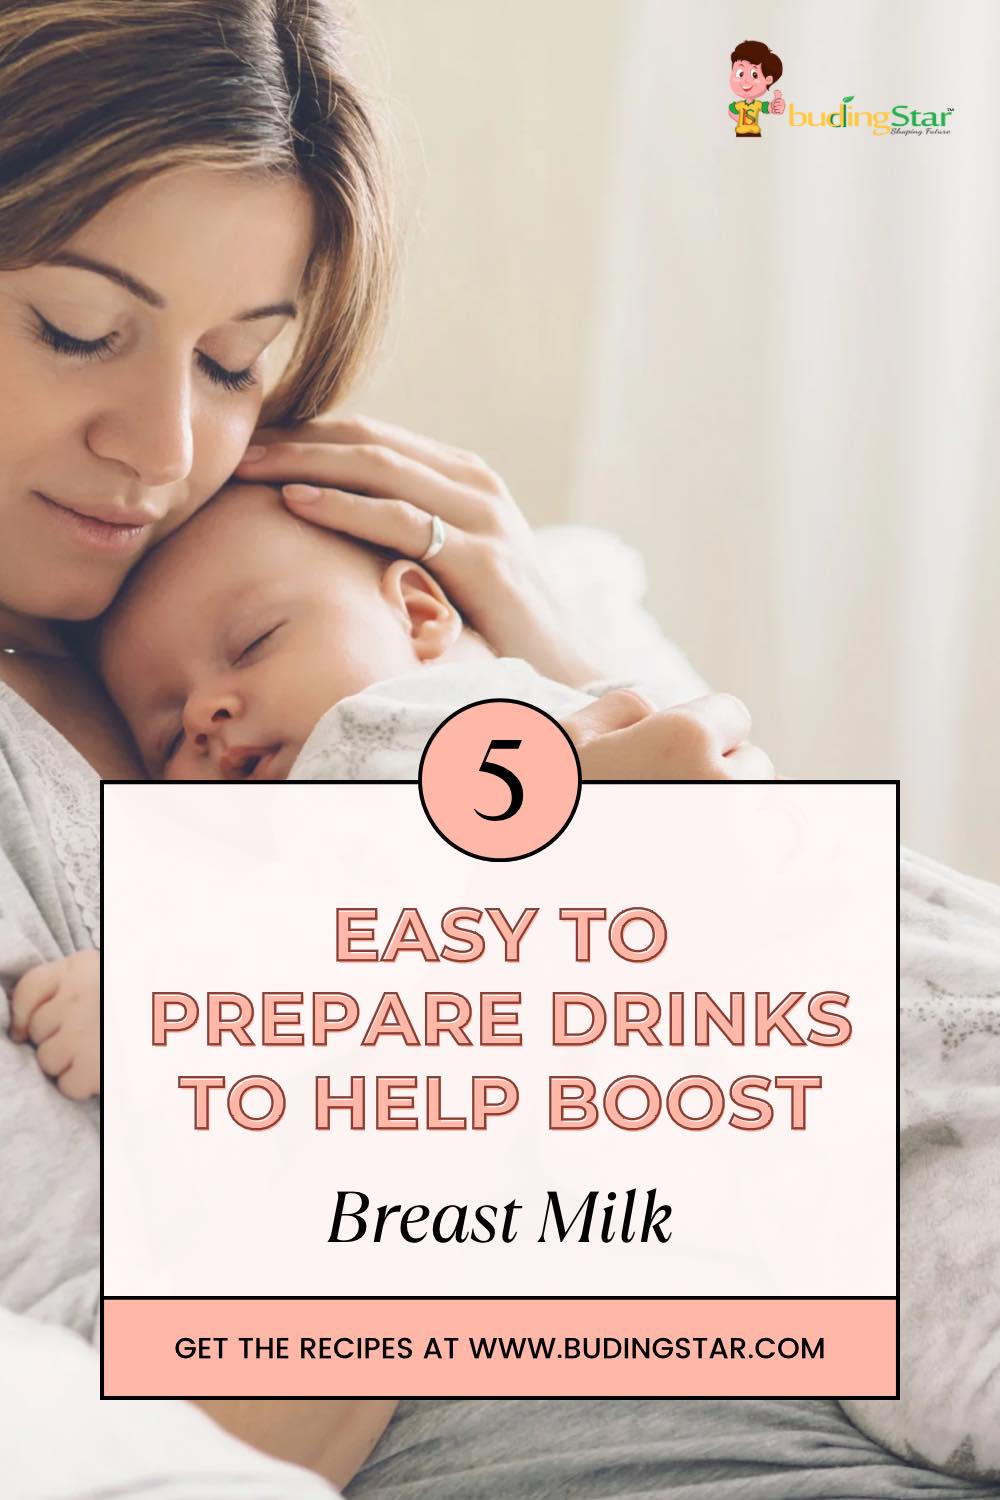 Easy to Prepare Drinks to Help Boost Breast Milk